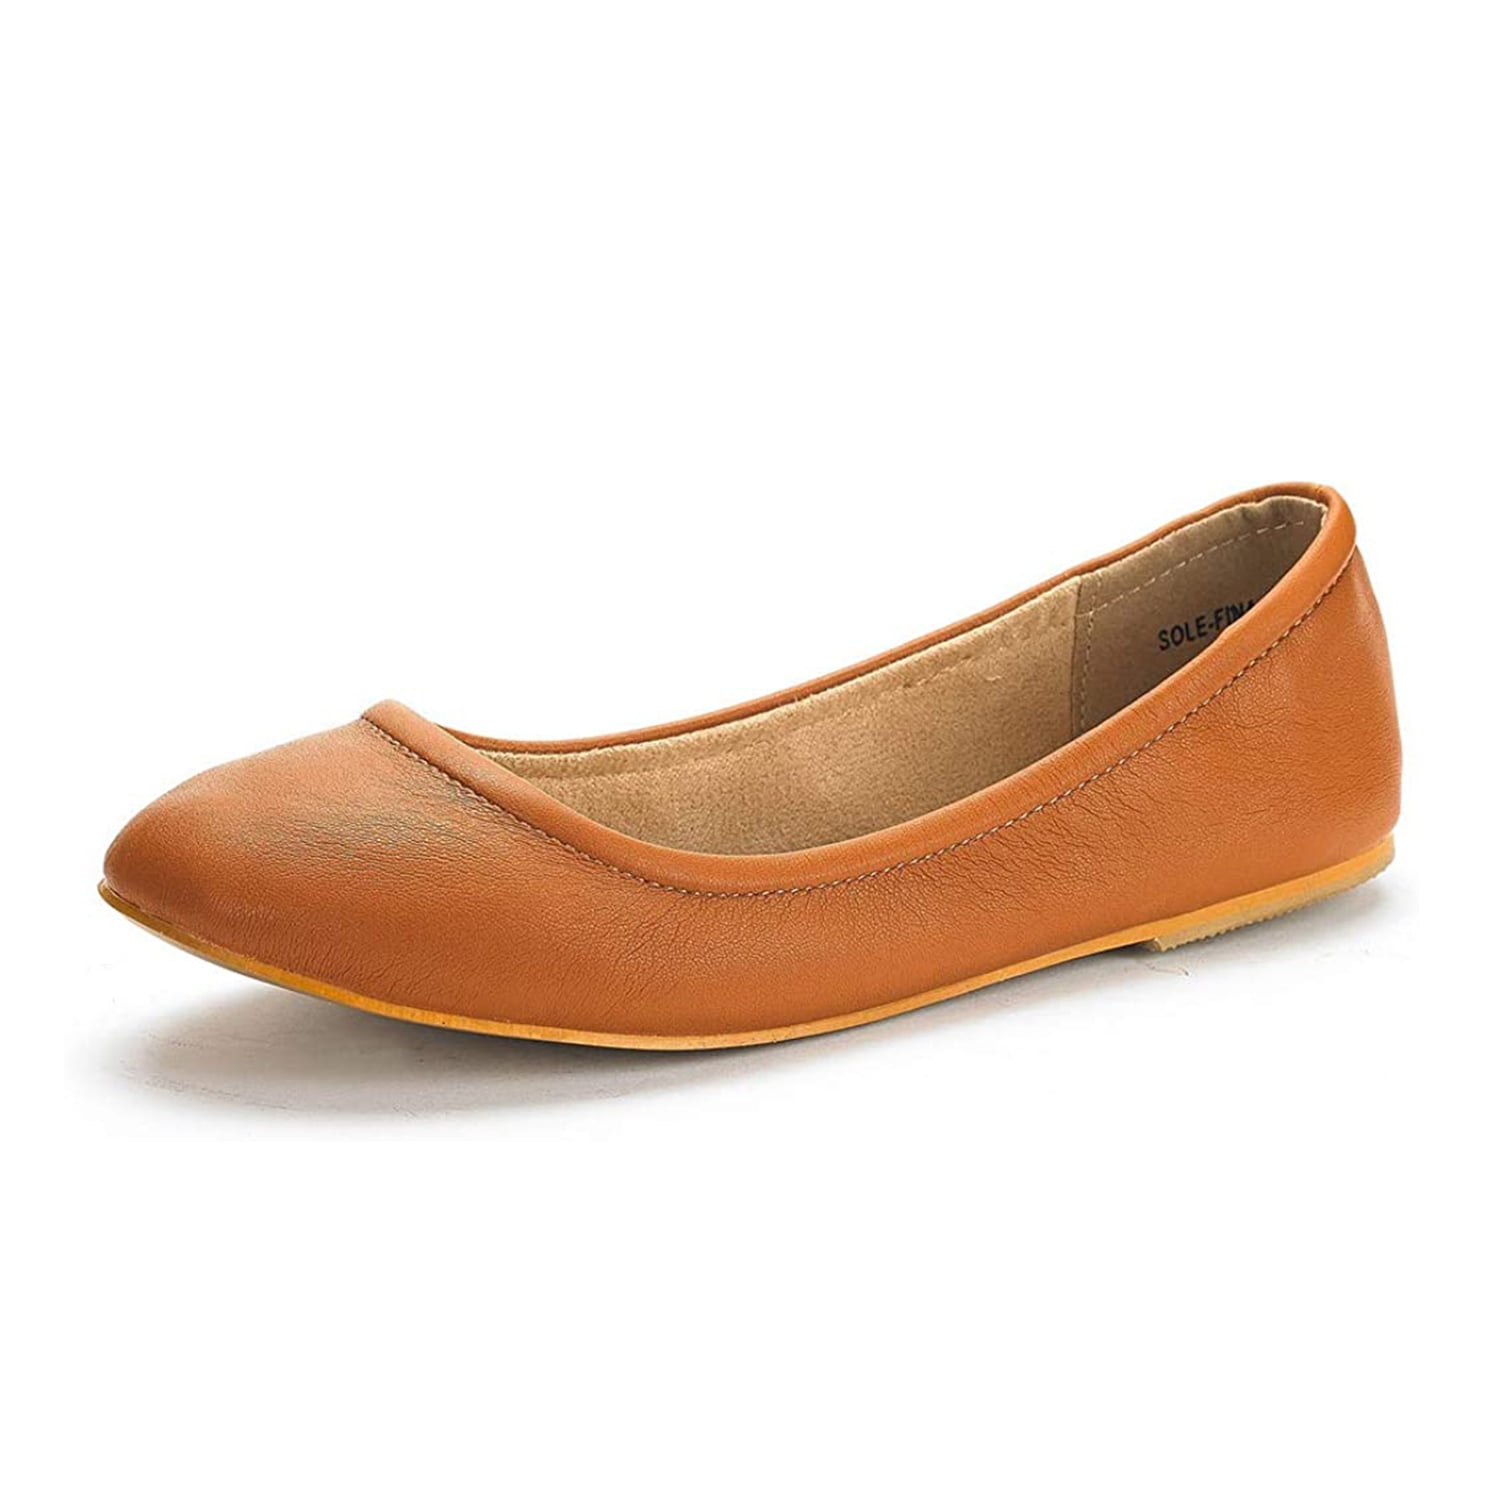 Orange Ballet Style Slip-On Womens Flats With Brown Bow Size 7.5 